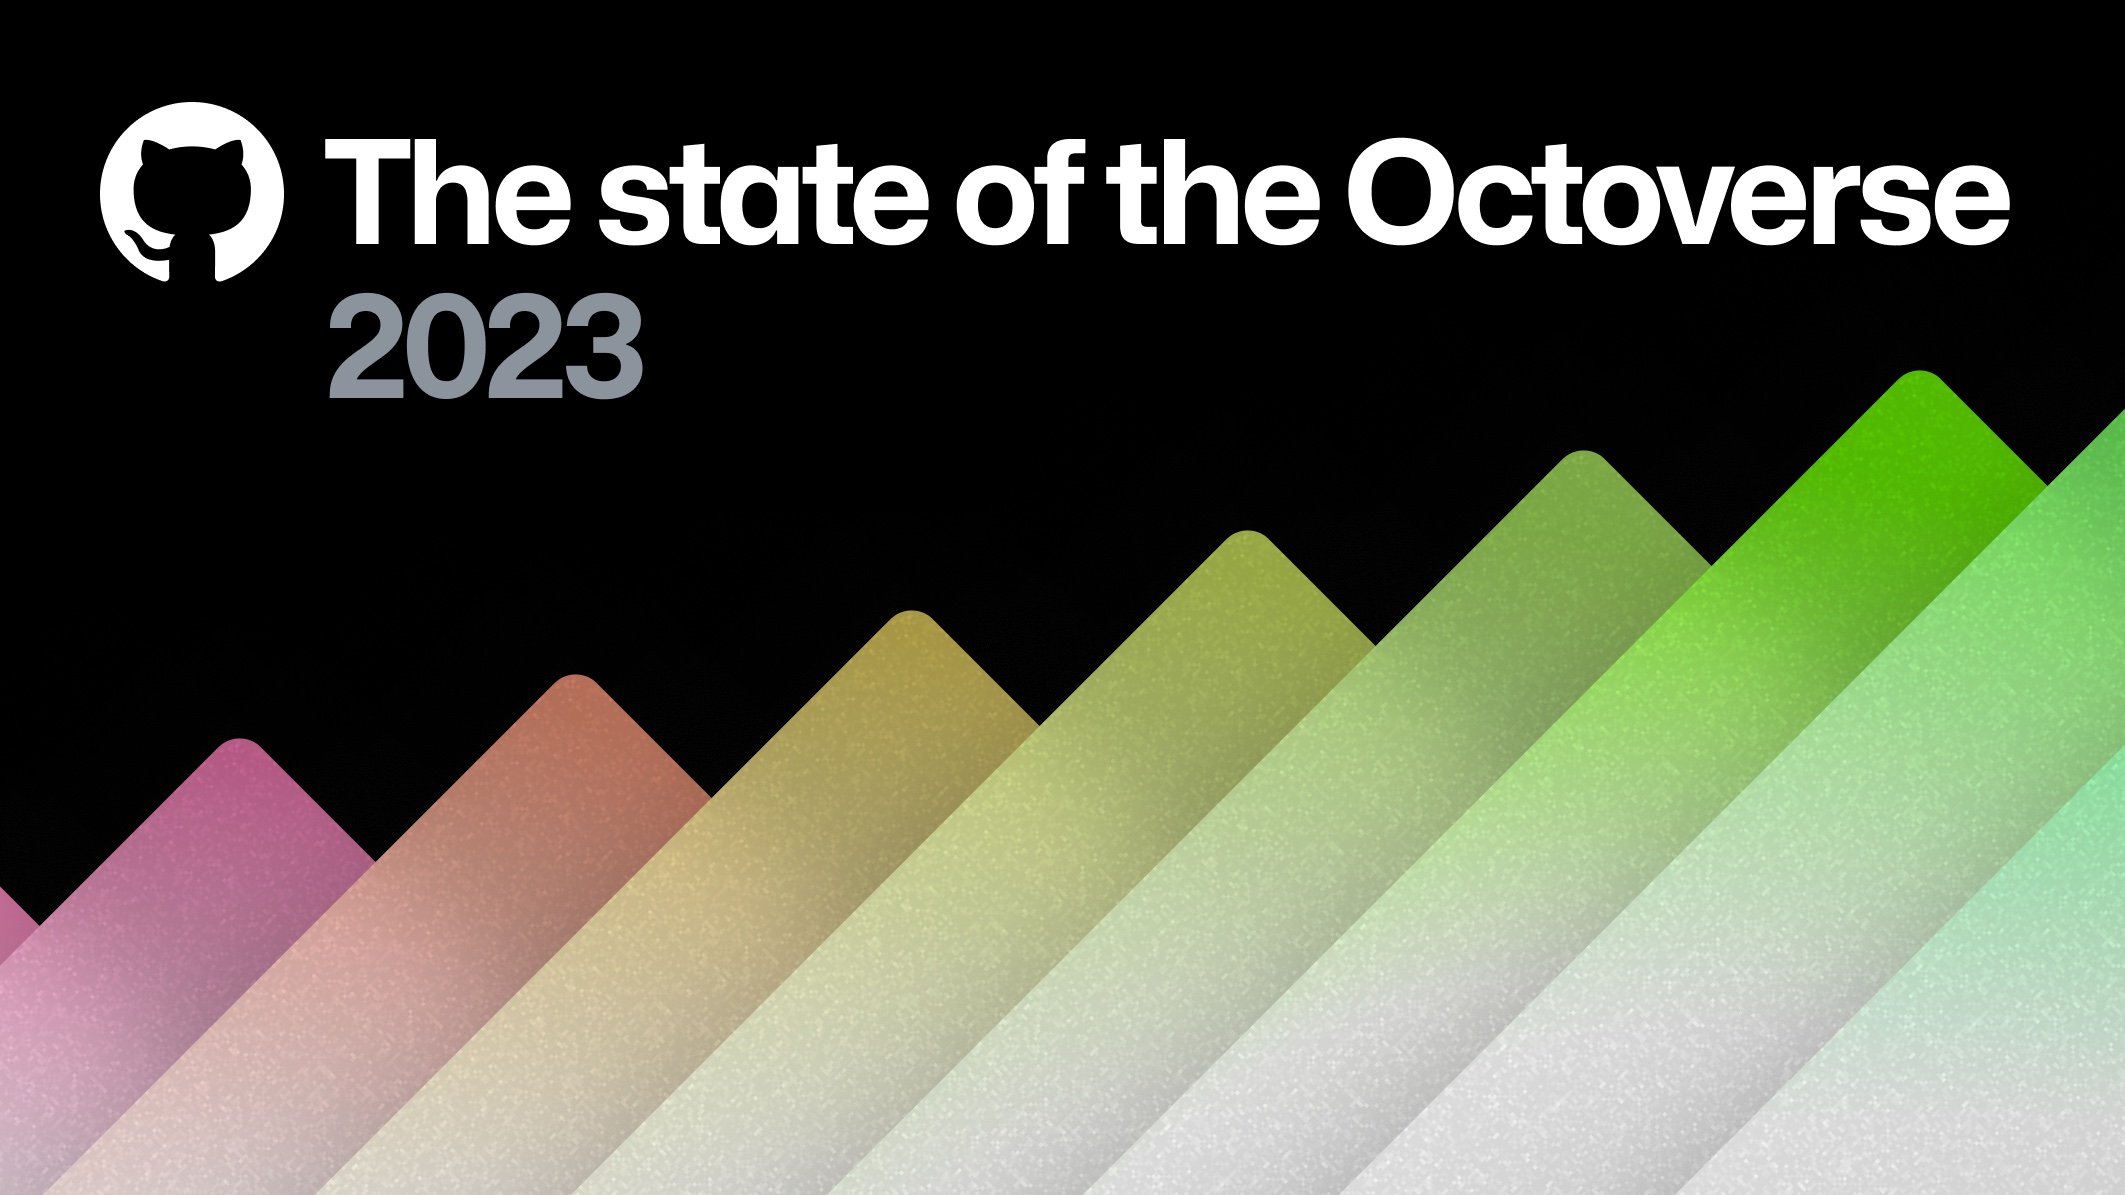 techy looking visual graphic with a title that says "The state of the Octoverse 2023"